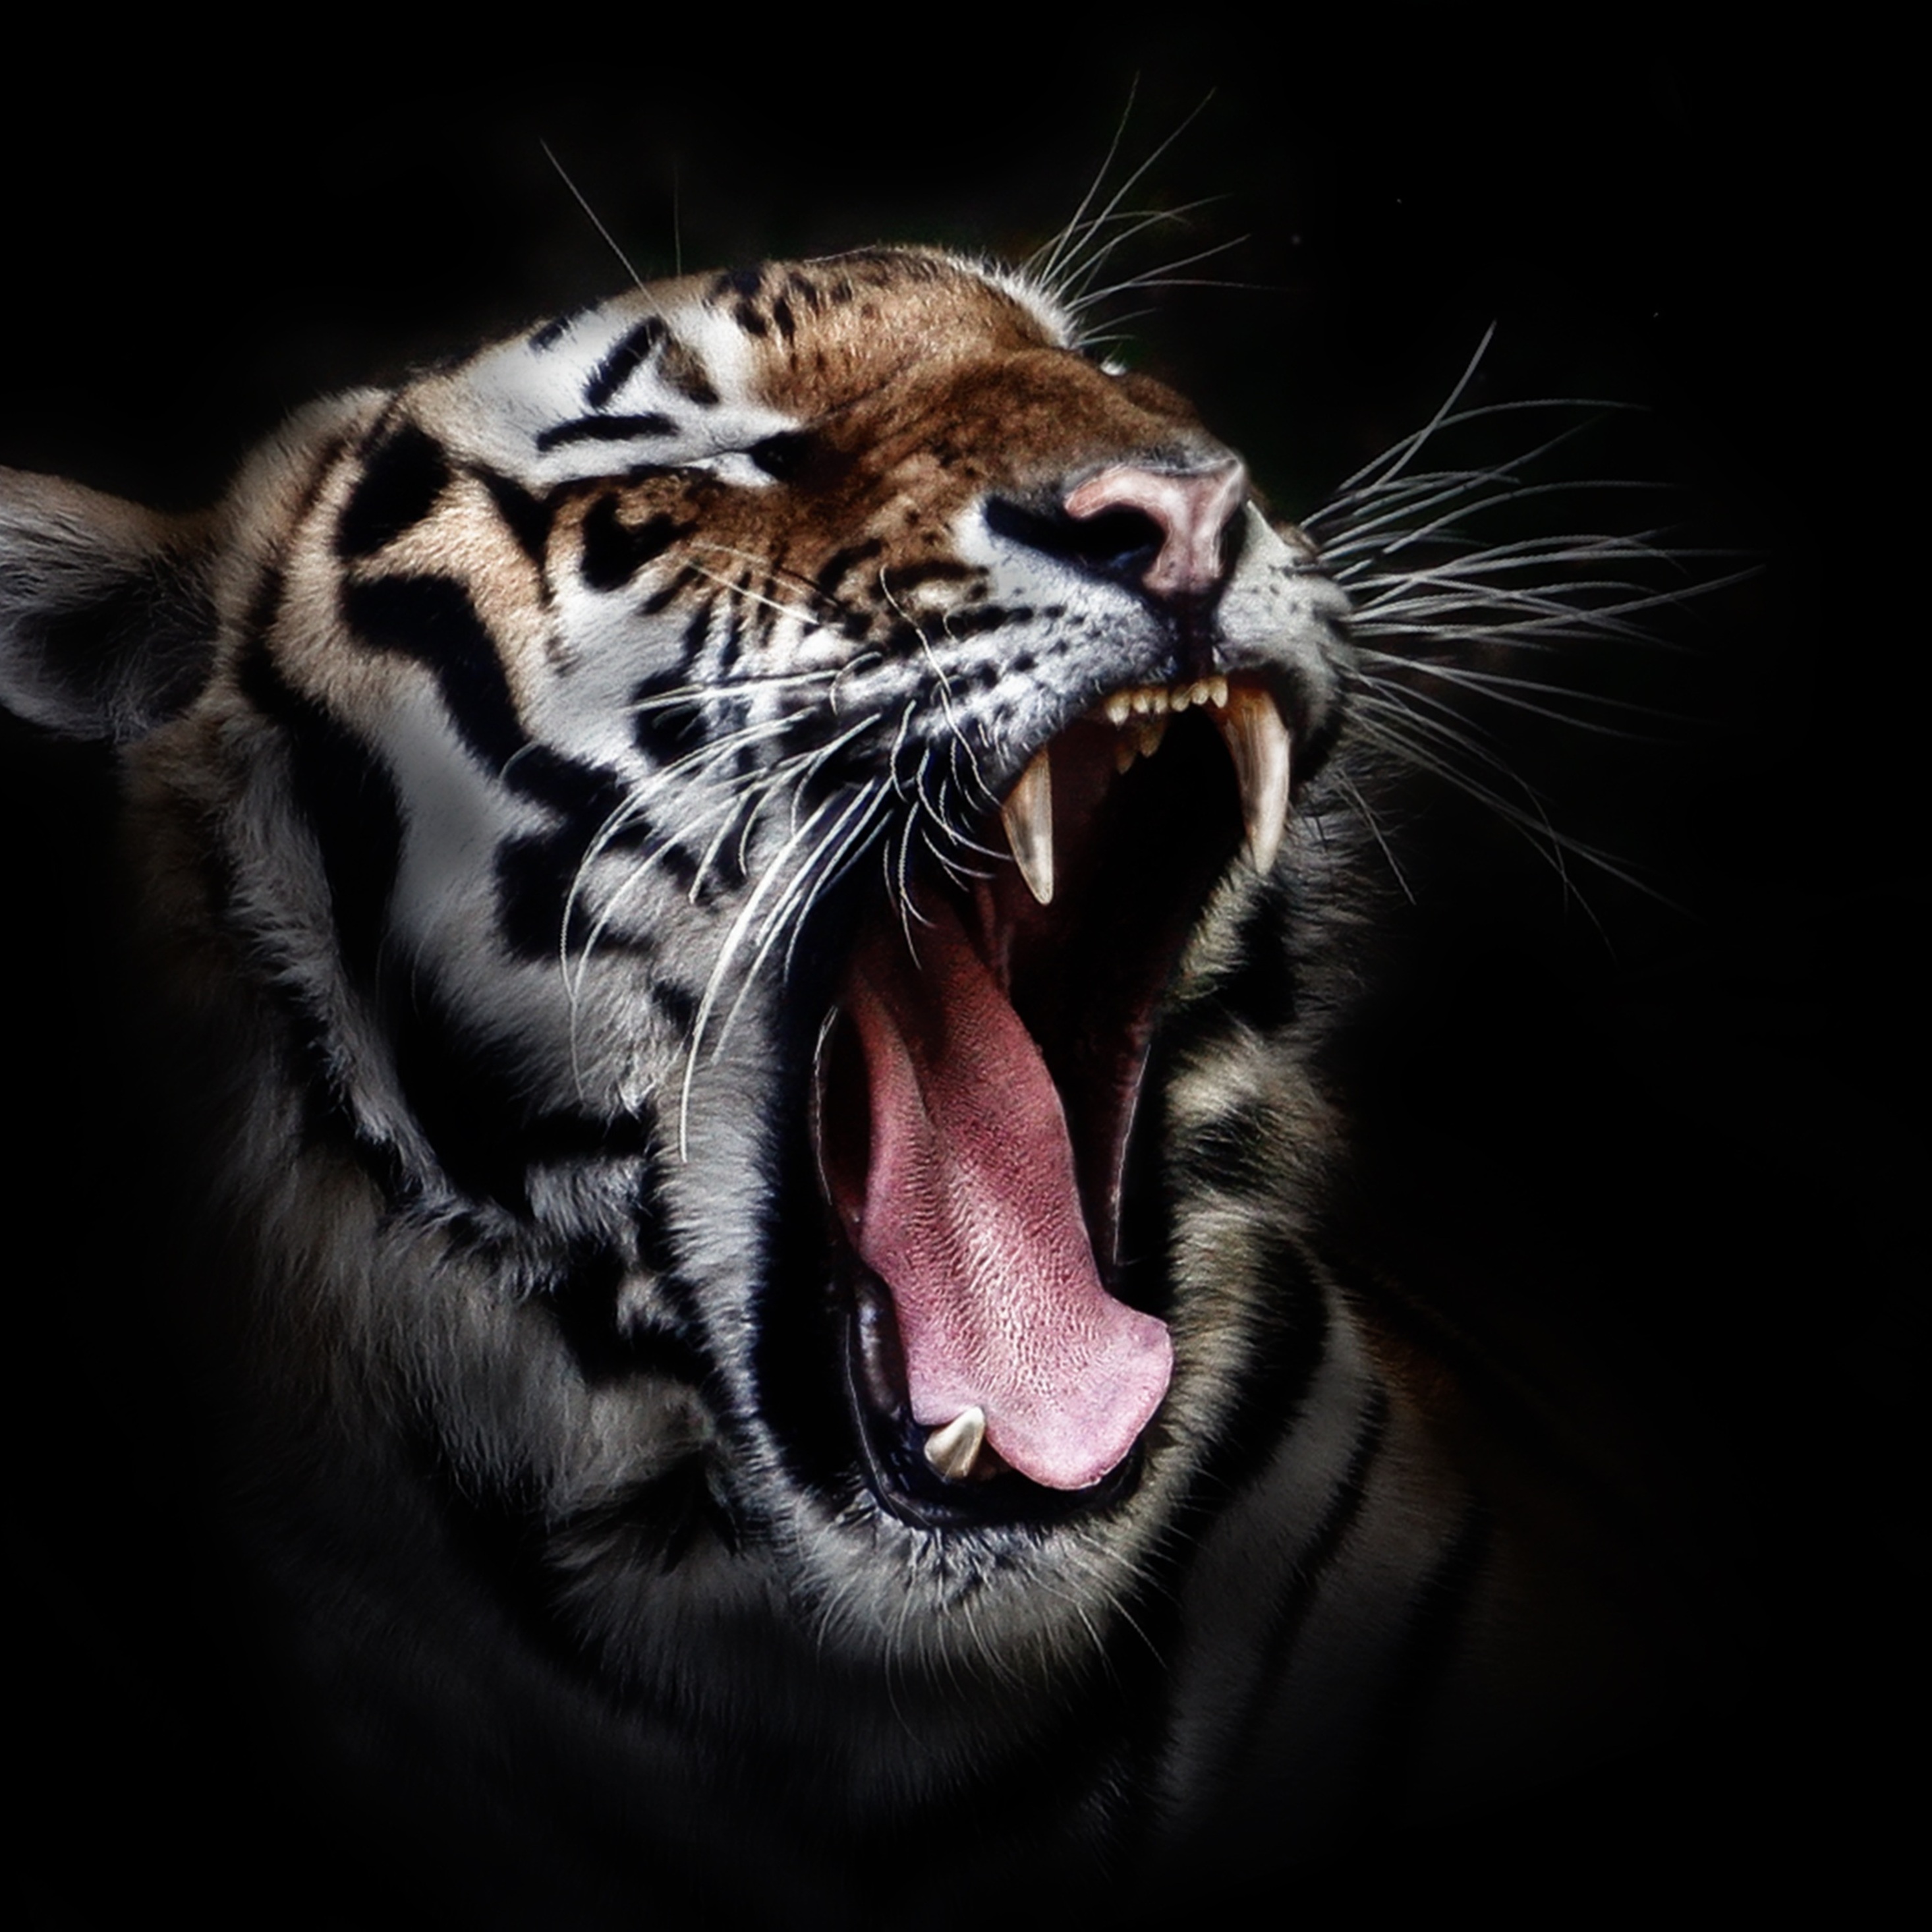 Tiger Open Mouth iPad Pro Retina Display HD 4k Wallpaper, Image, Background, Photo and Picture